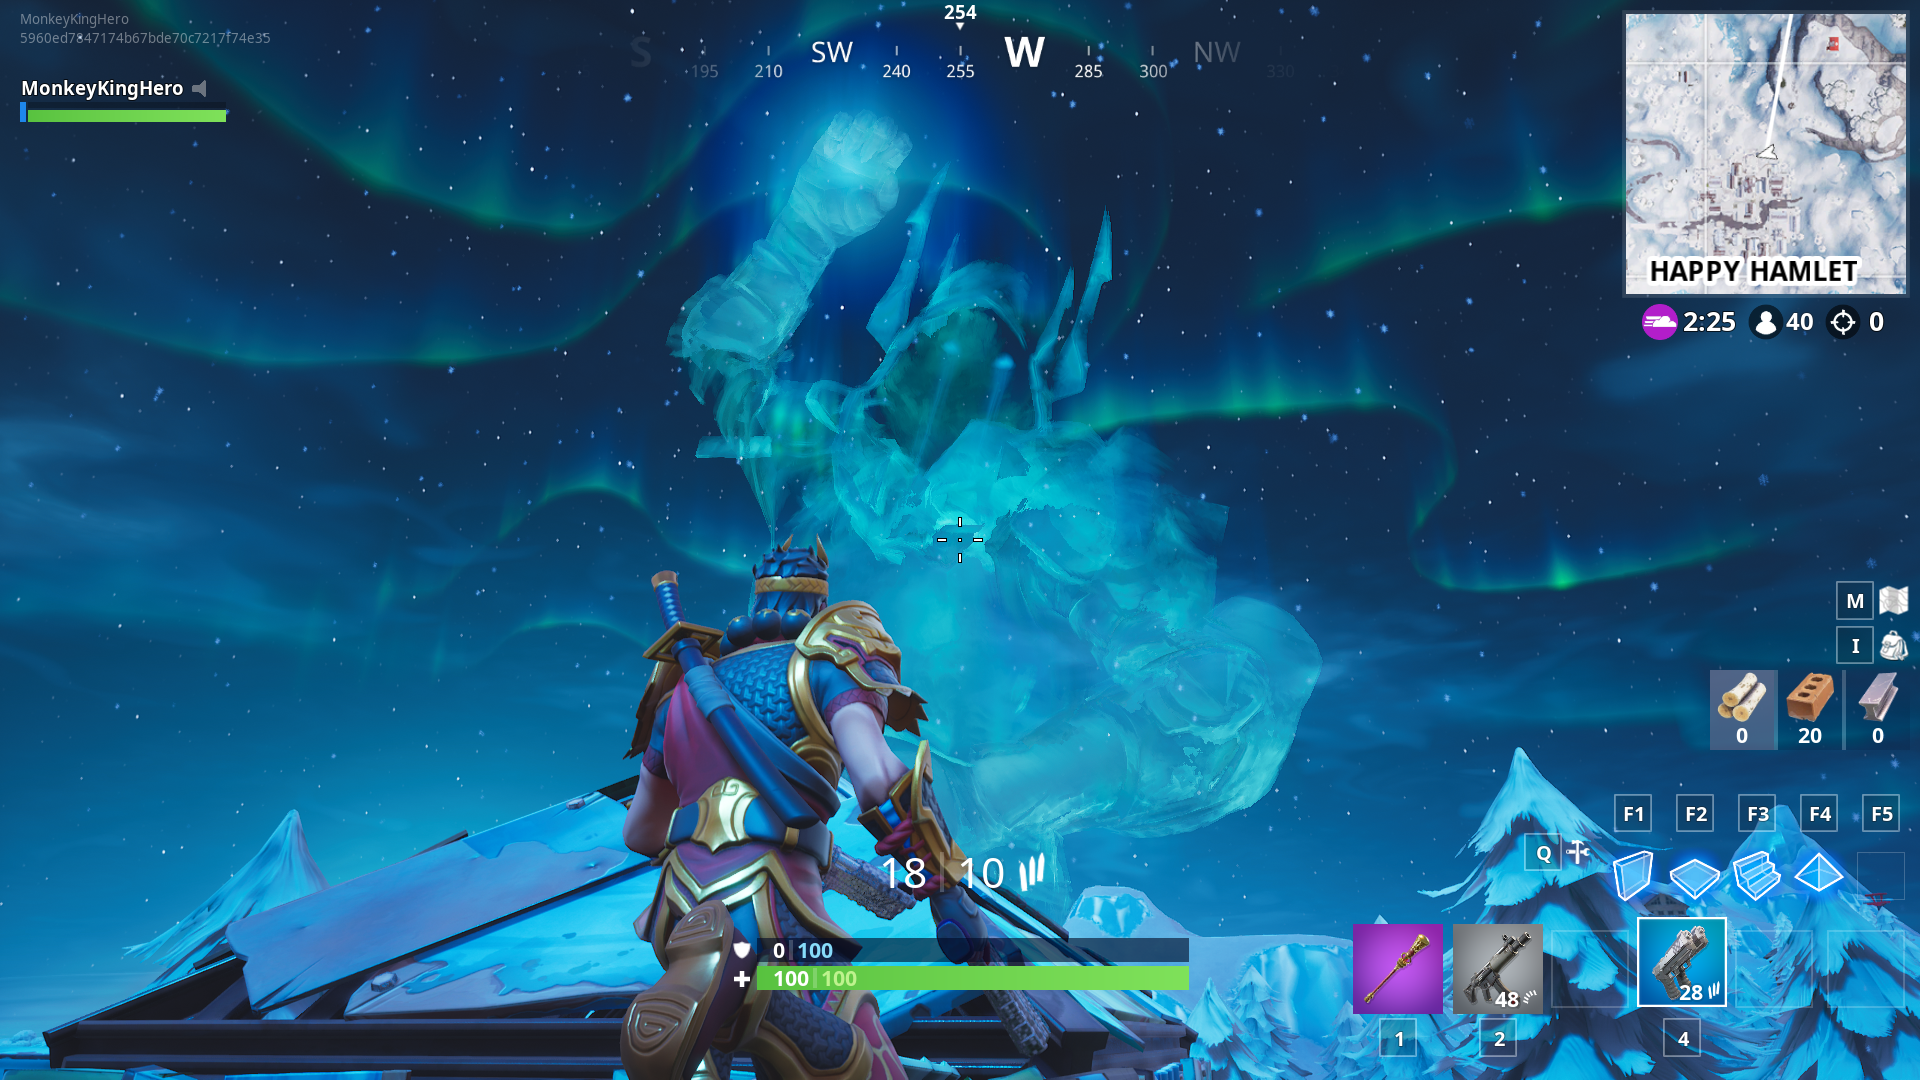 Giant Ice King Covers The Entire Map With Snow Brings Back